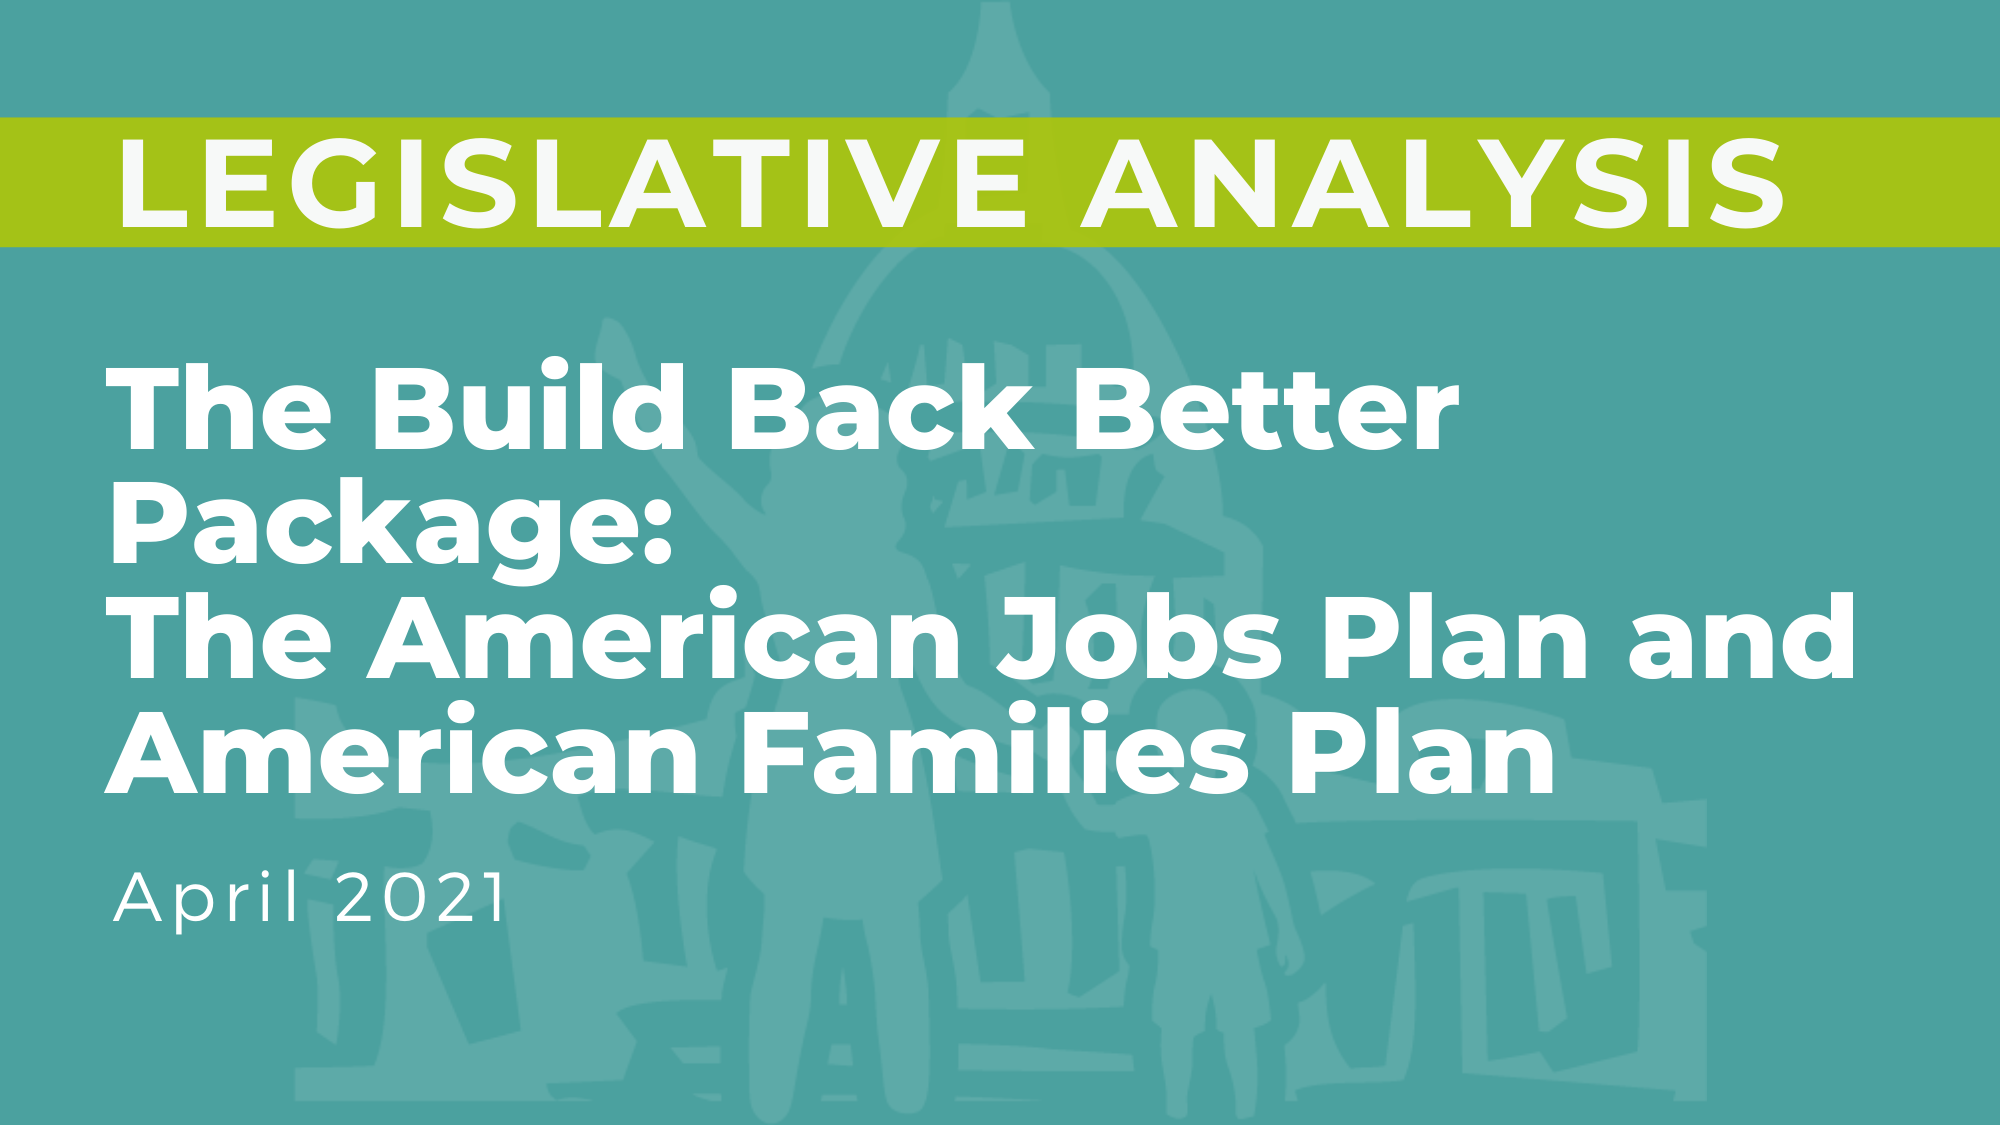 The Build Back Better Package: The American Jobs Plan and American Families Plan